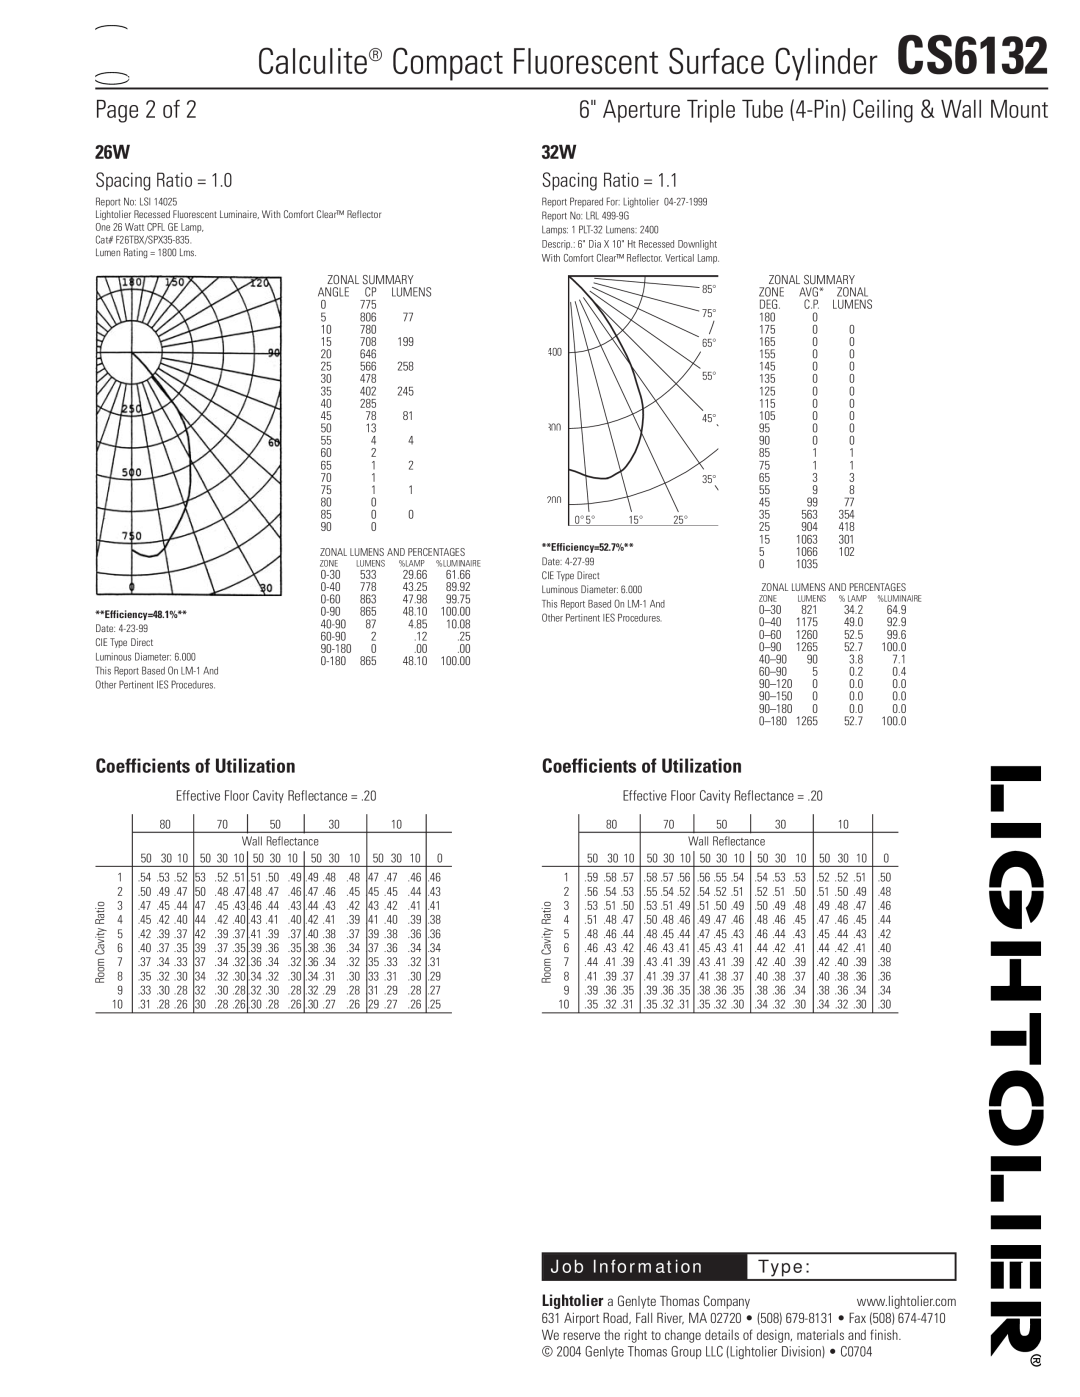 Lightolier CS6132 Page 2 of, Aperture Triple Tube 4-PinCeiling & Wall Mount, Spacing Ratio =, Job Information, Type 